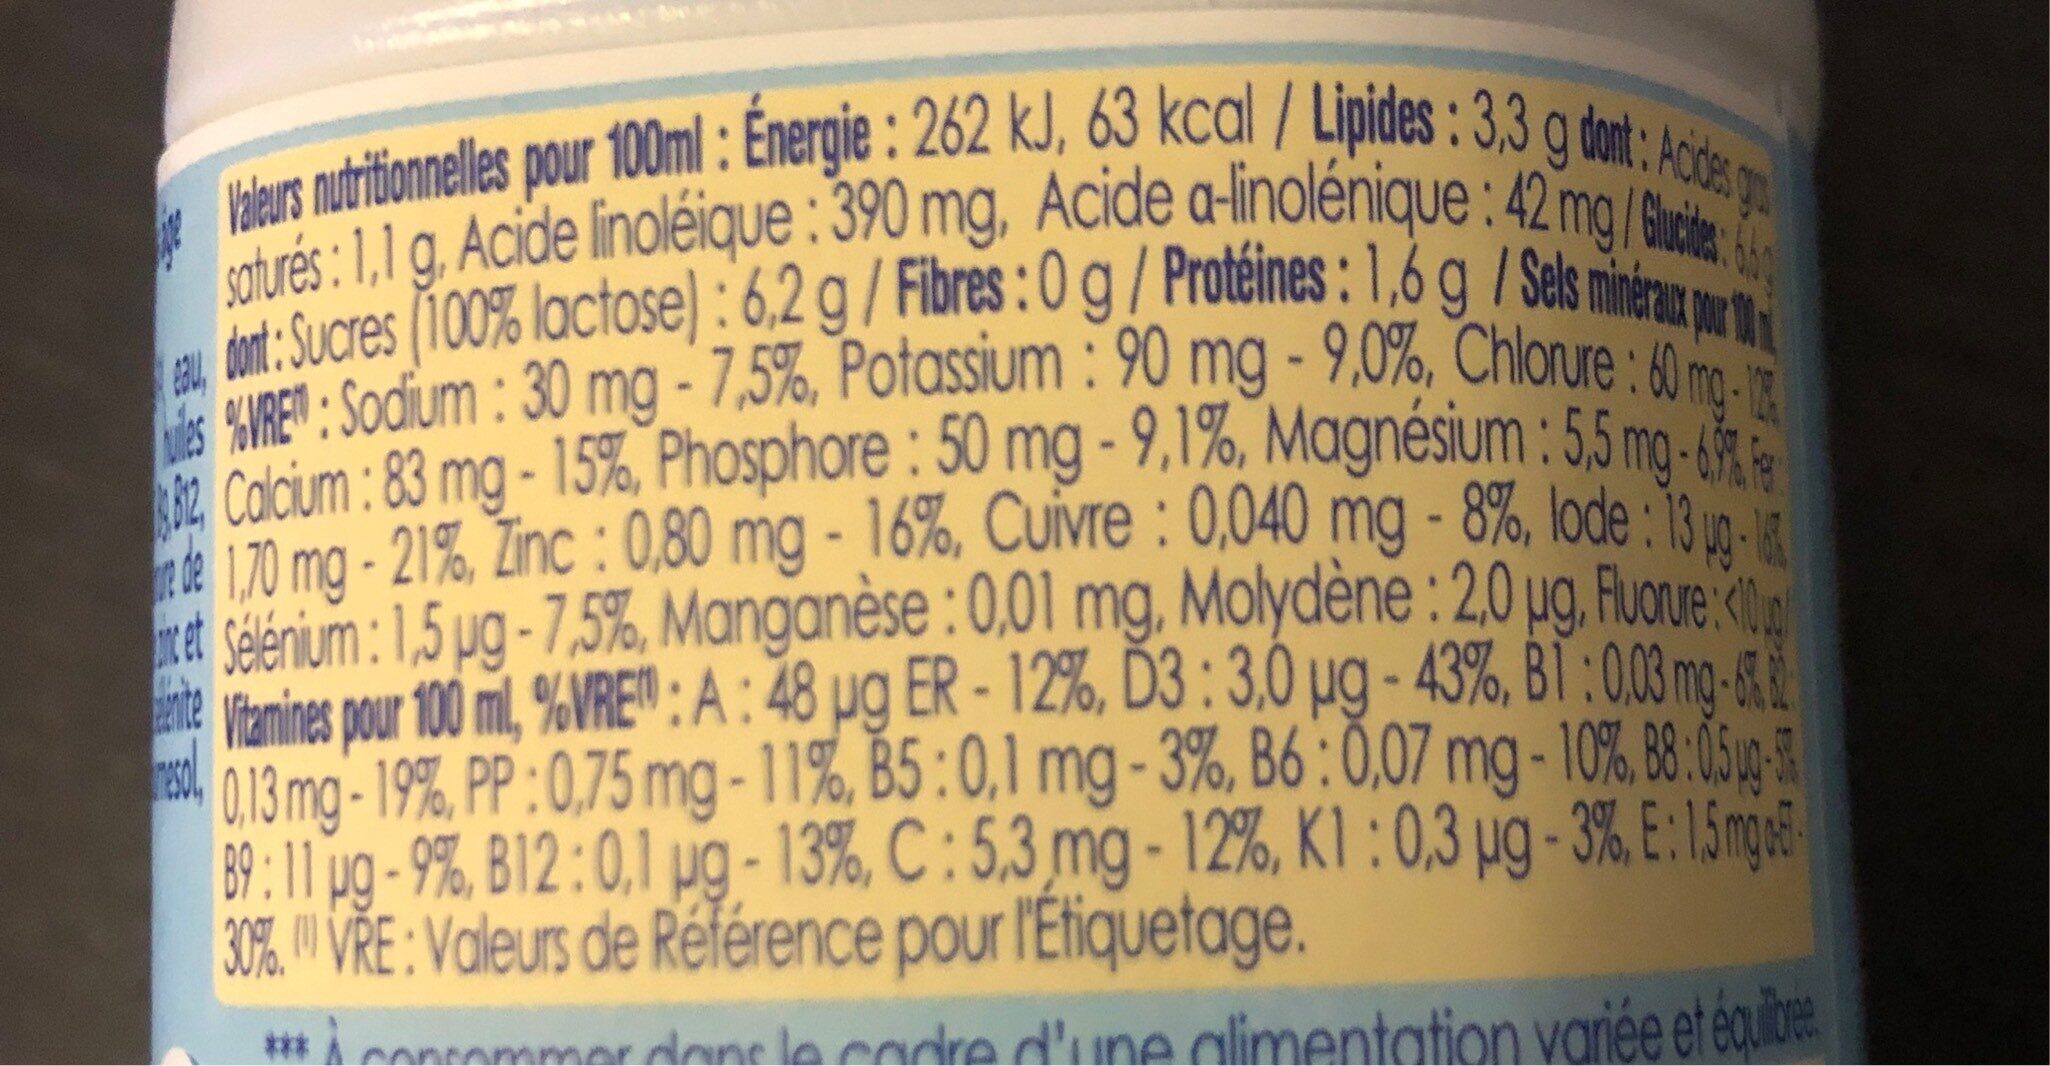 Baby croissance 4 - Nutrition facts - fr